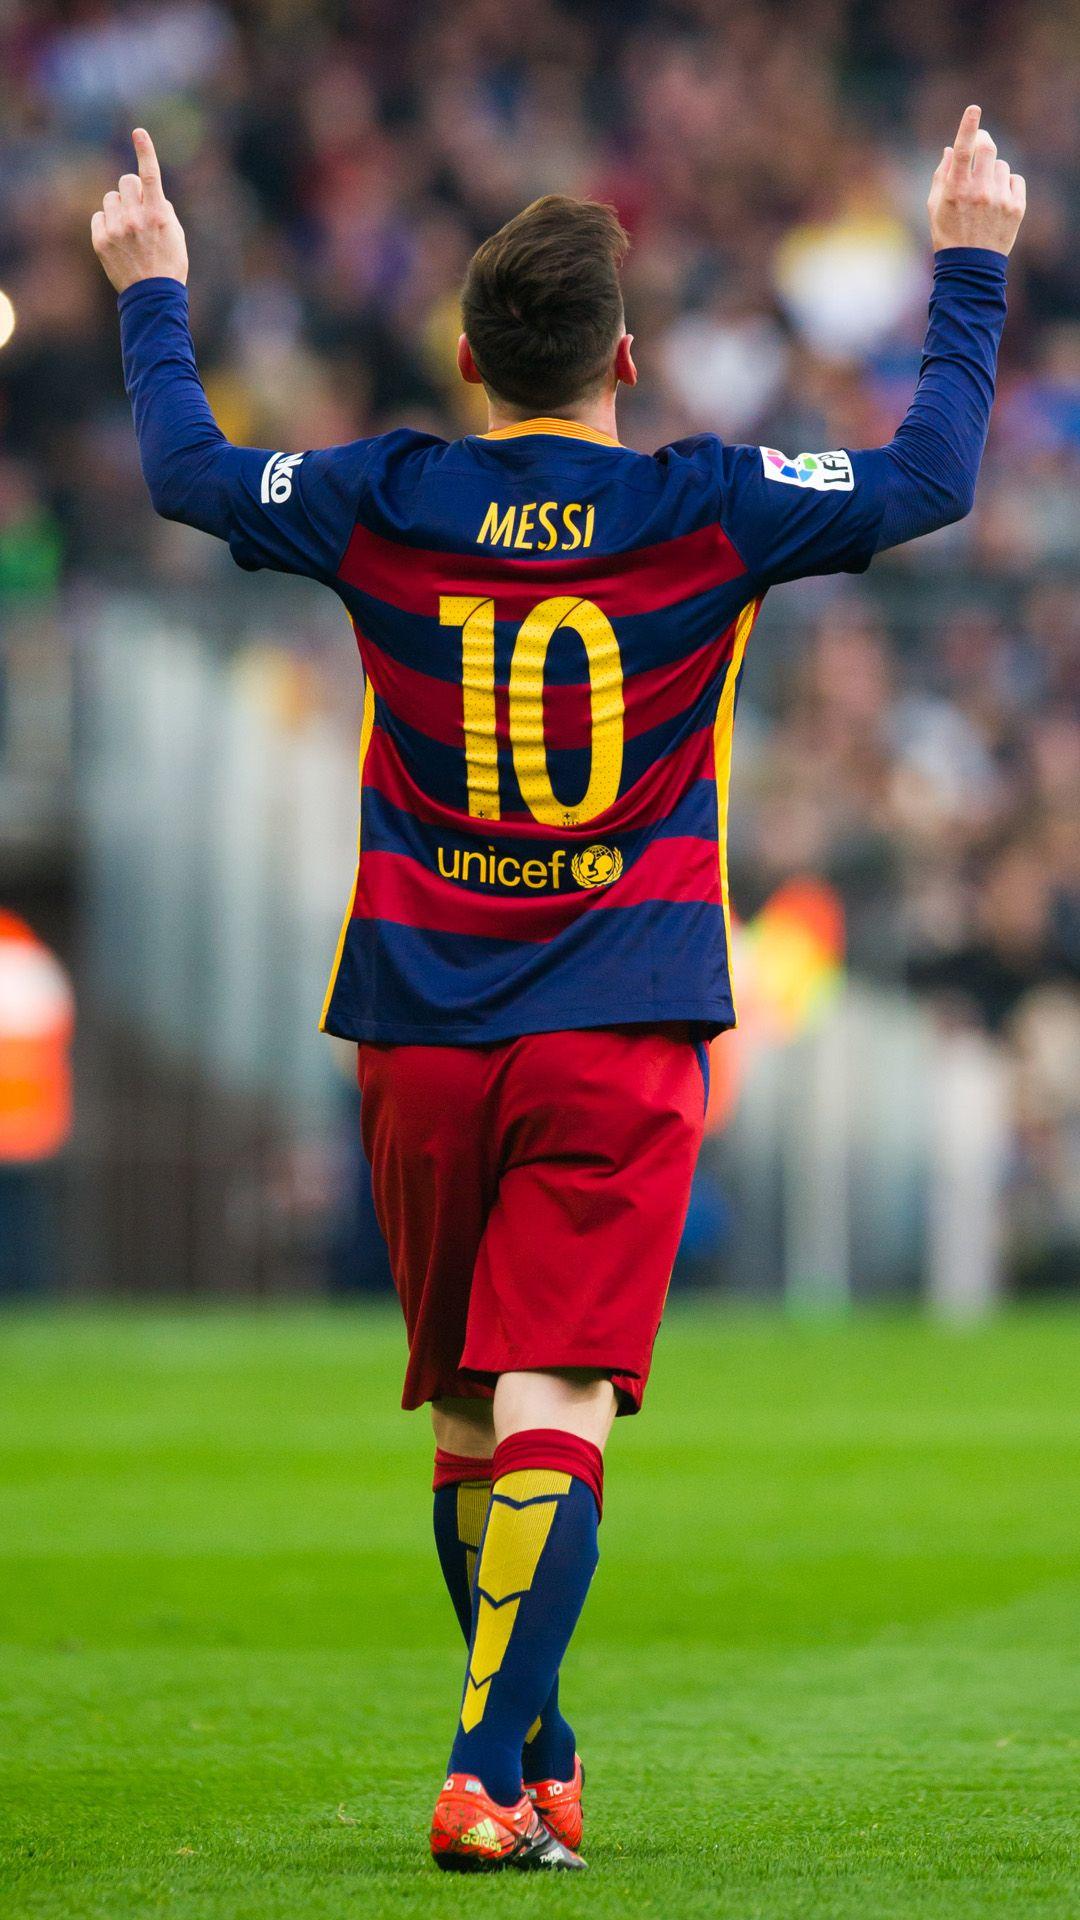 Football Player Messi Wallpapers Top Free Football Player Messi